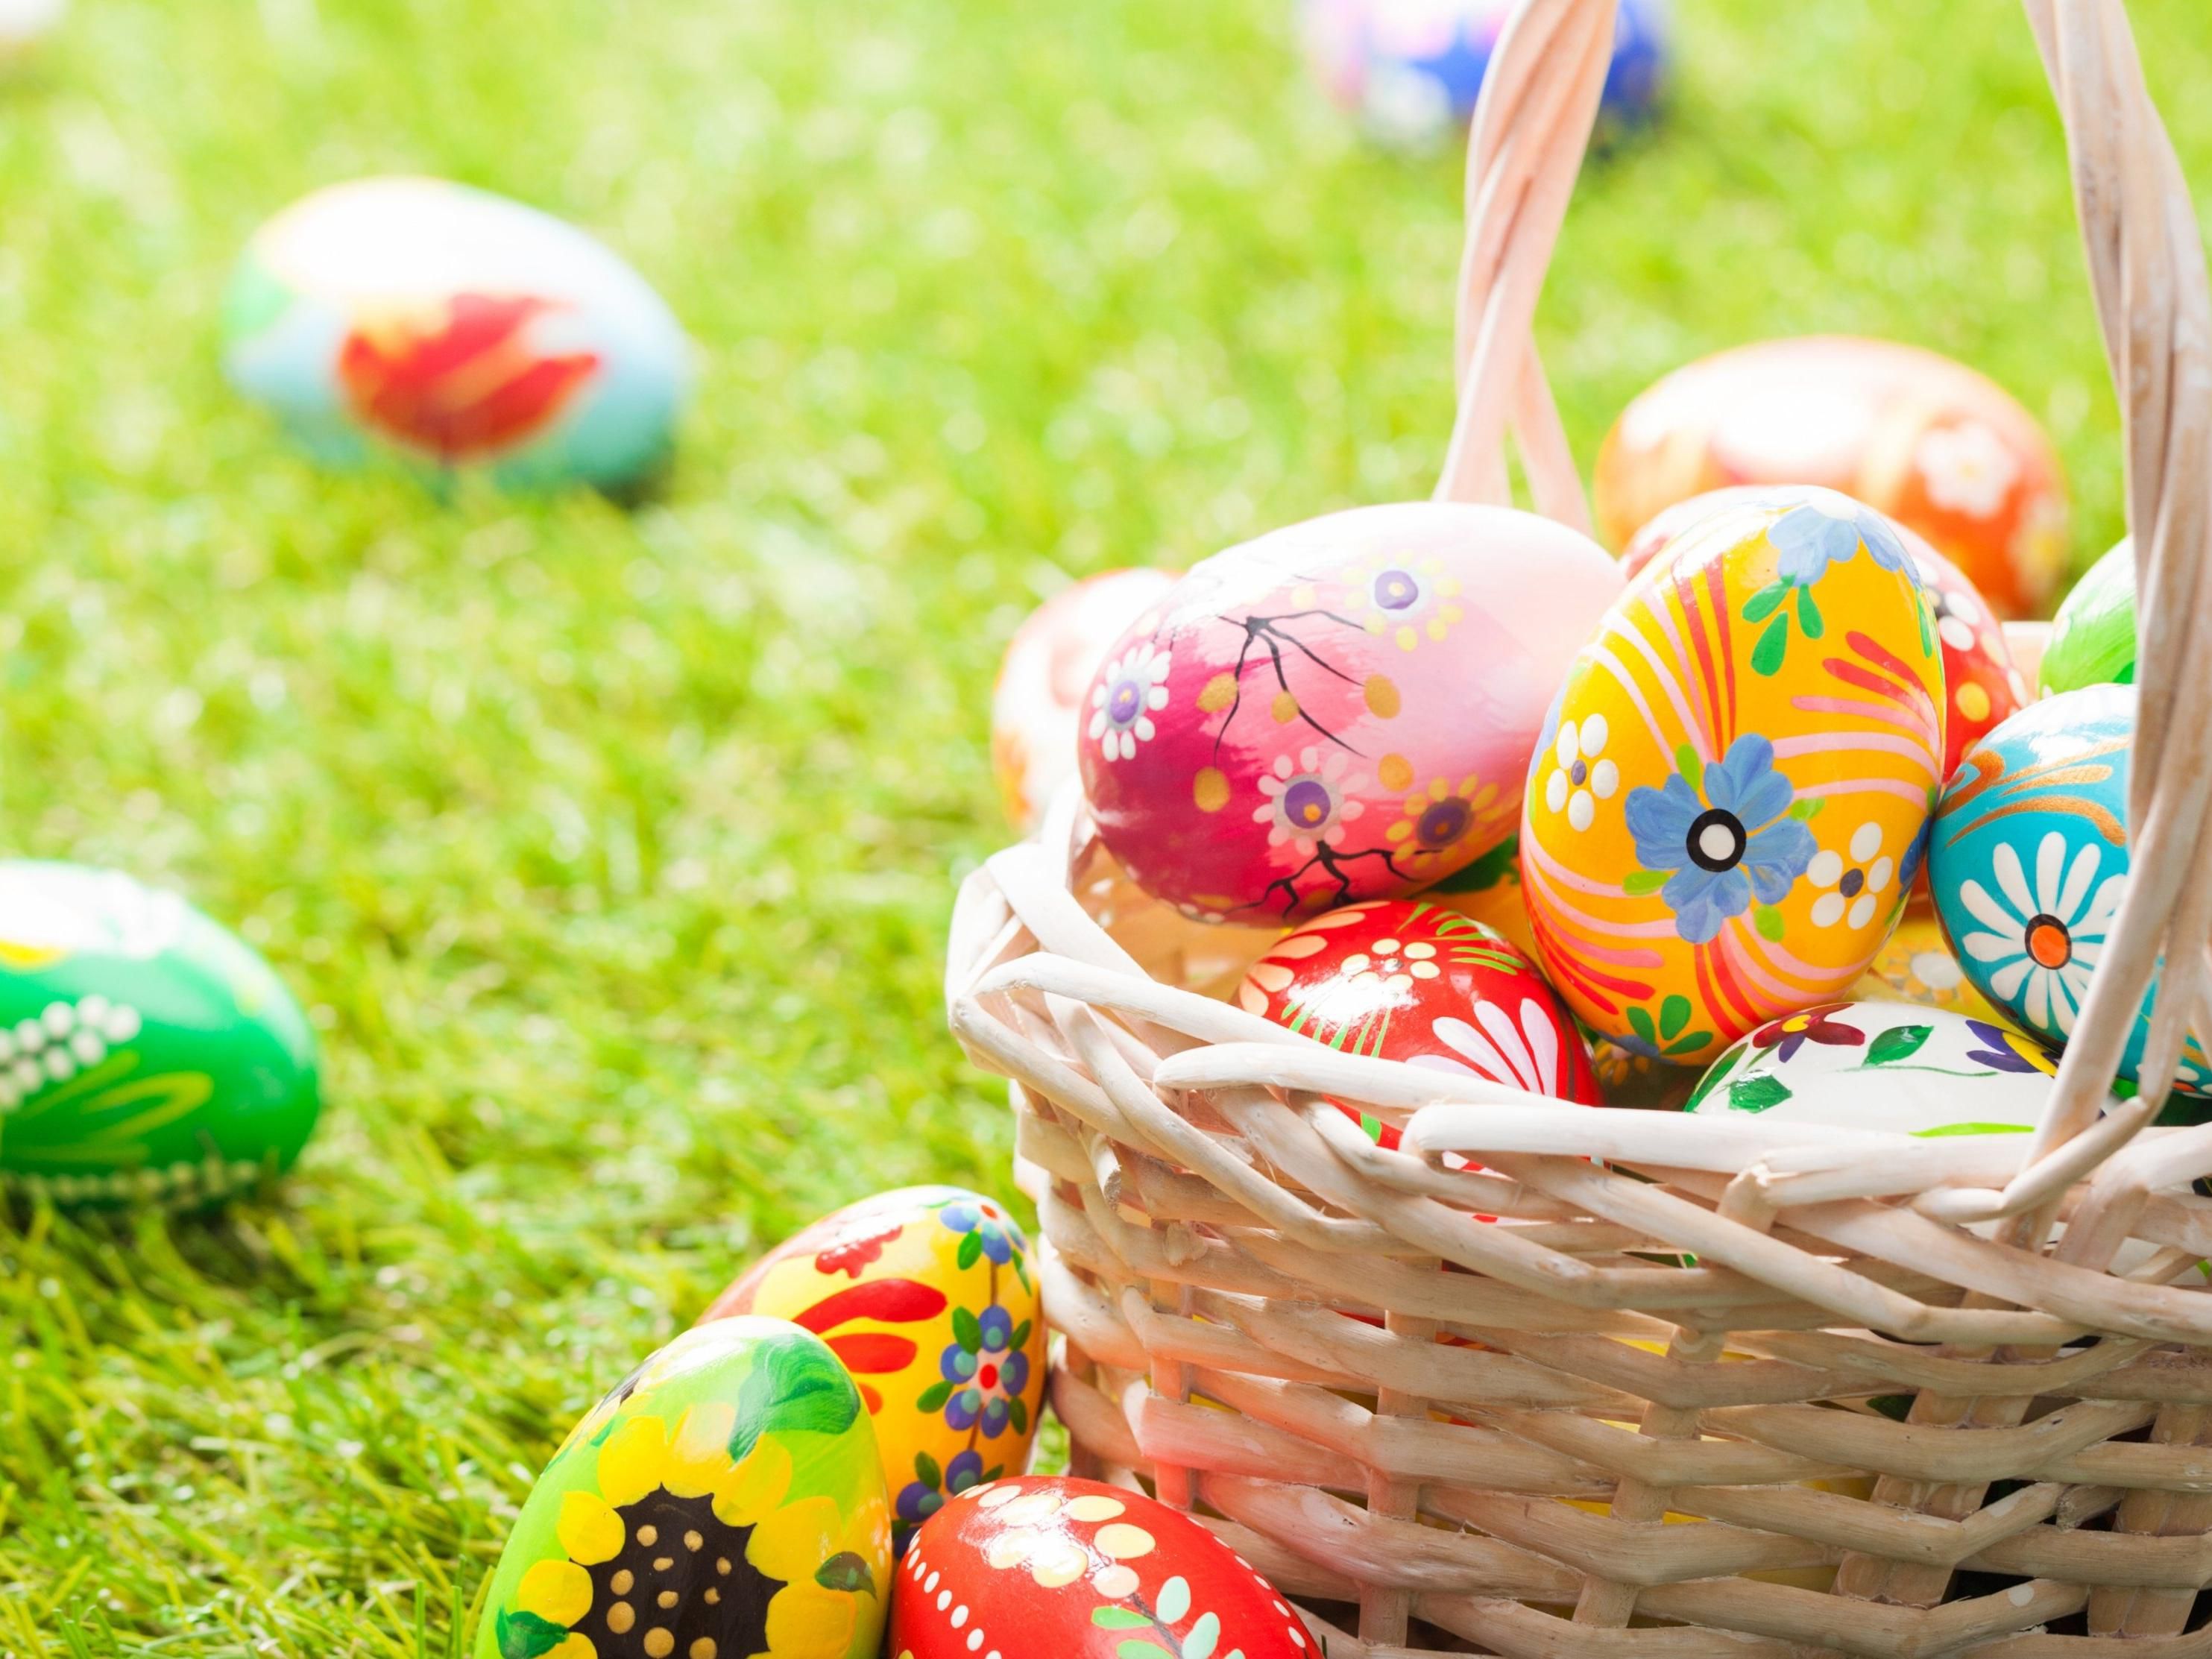 It's Easter Family Fun Weekend!